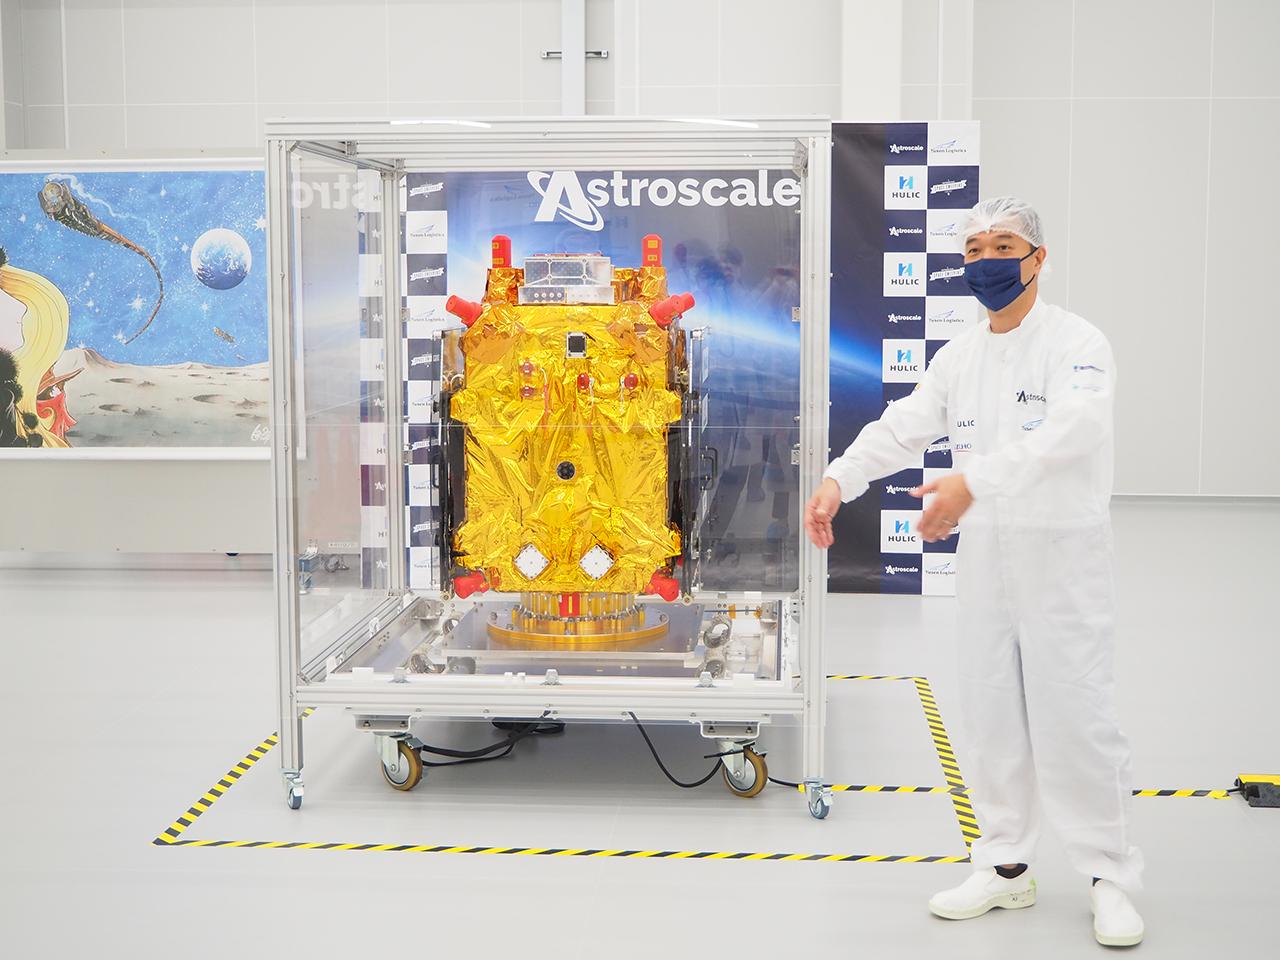 The actual commercial debris removal demonstration satellite 